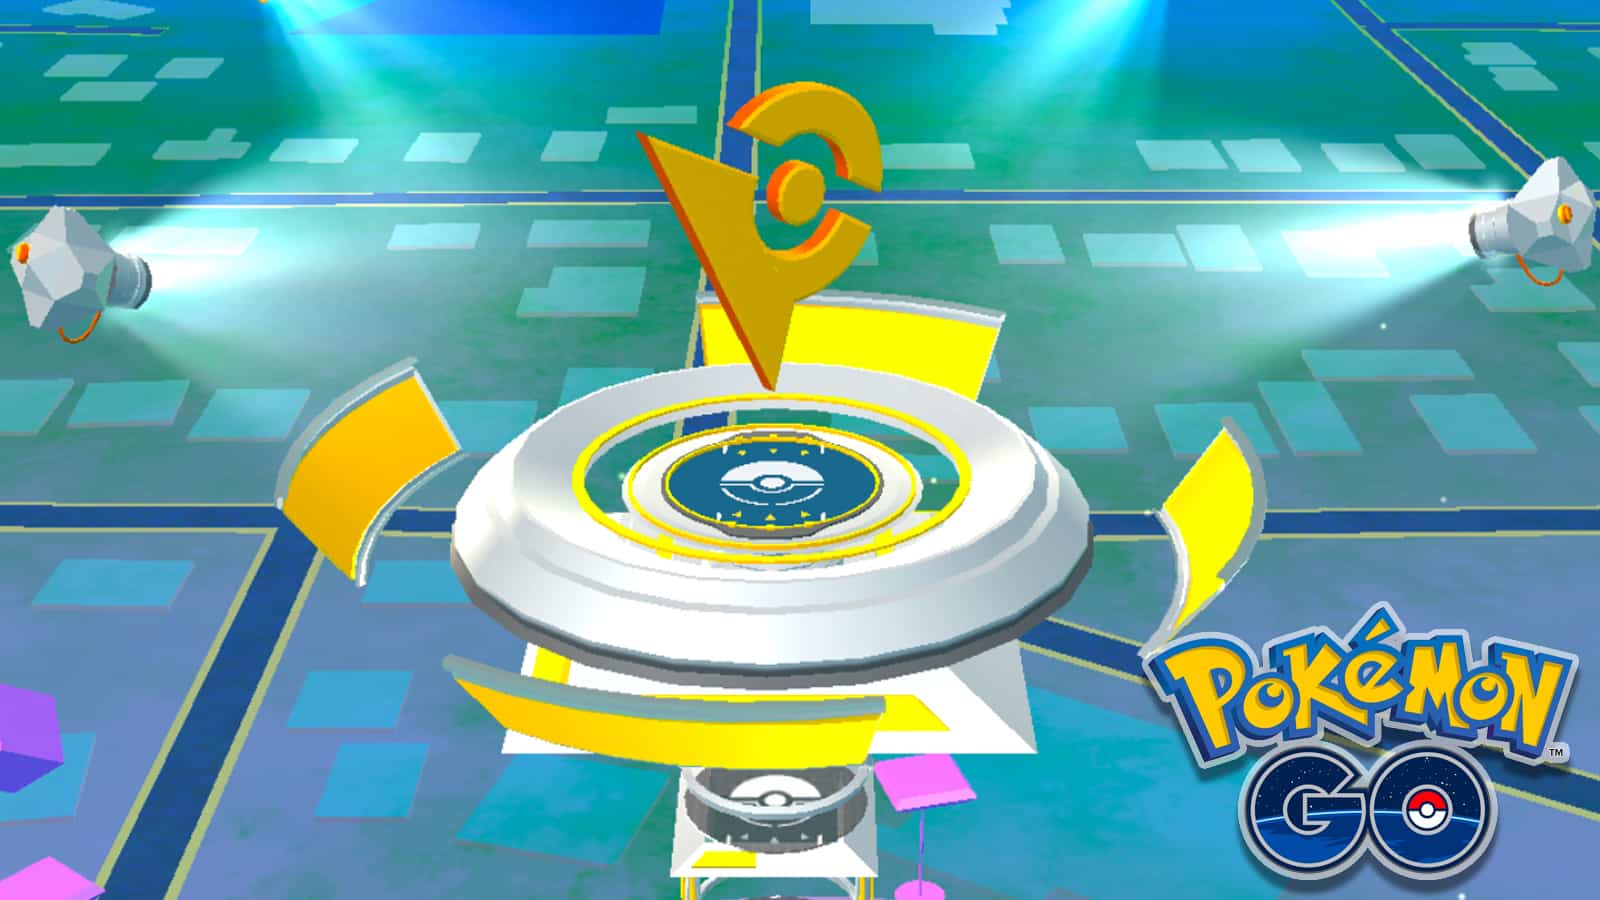 New Pokemon Go trick lets players double Gym distance